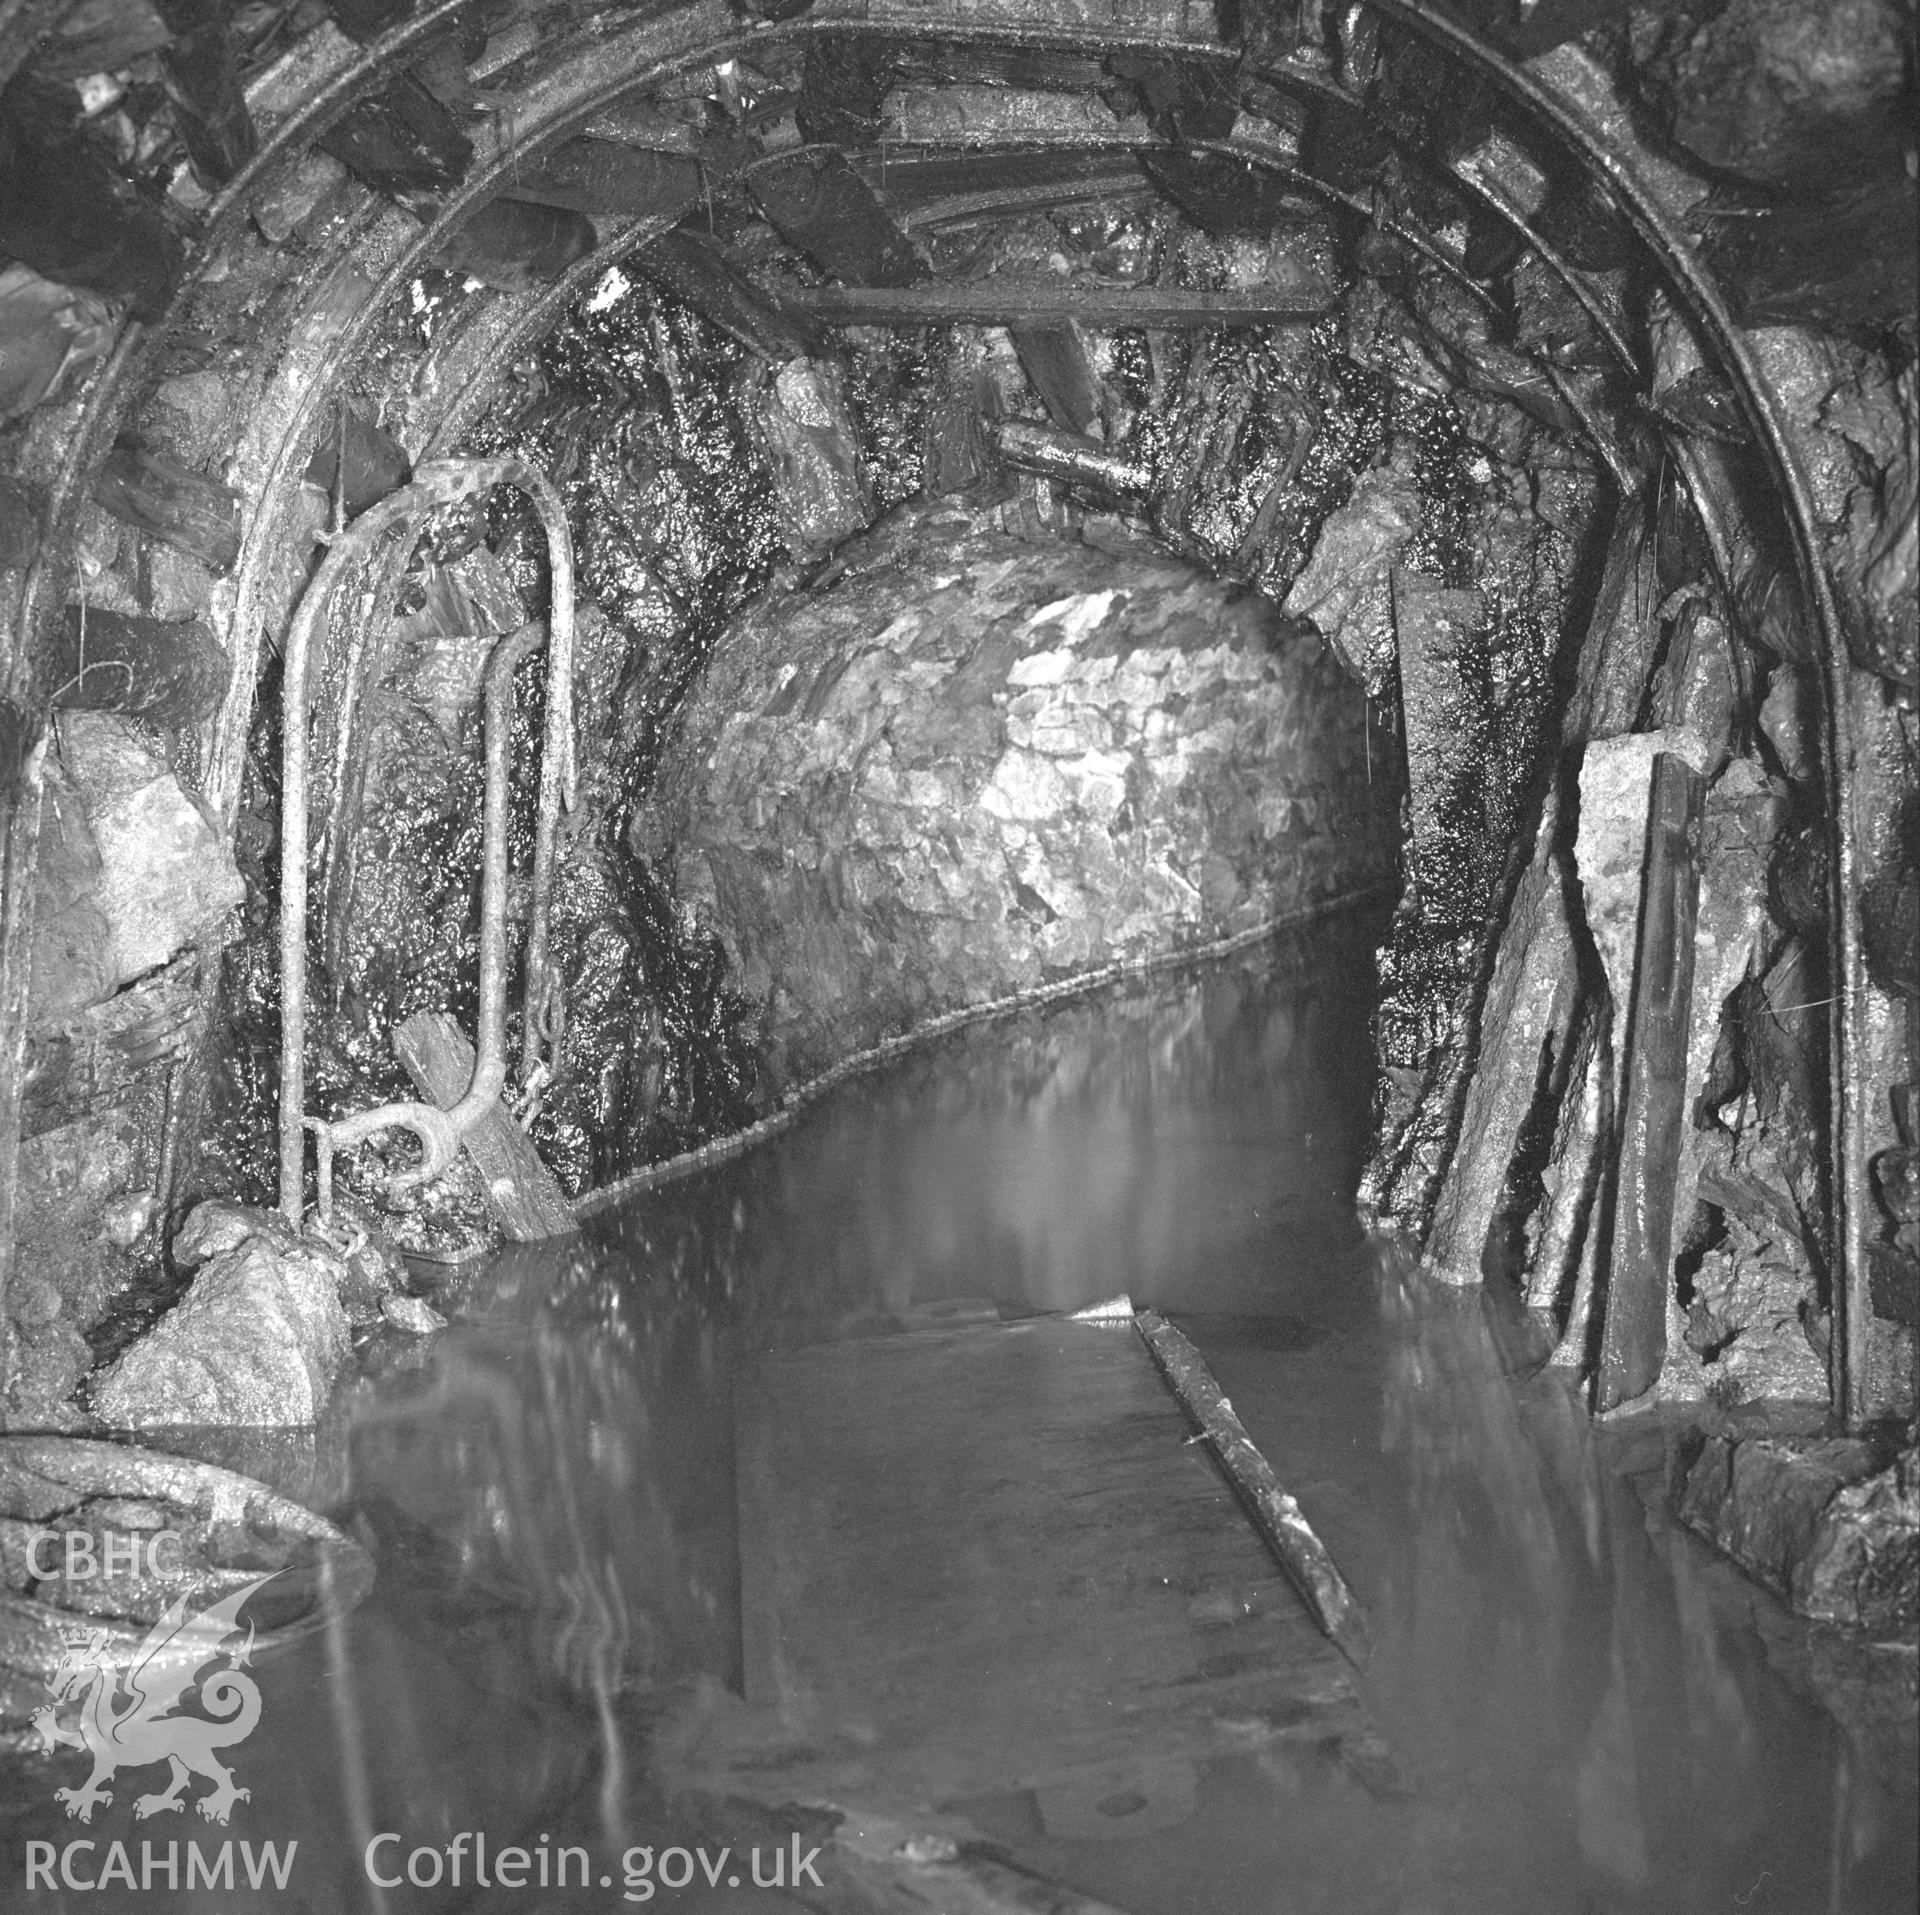 Digital copy of an acetate negative showing original entrance to Wood's Level at Big Pit, from the John Cornwell Collection.